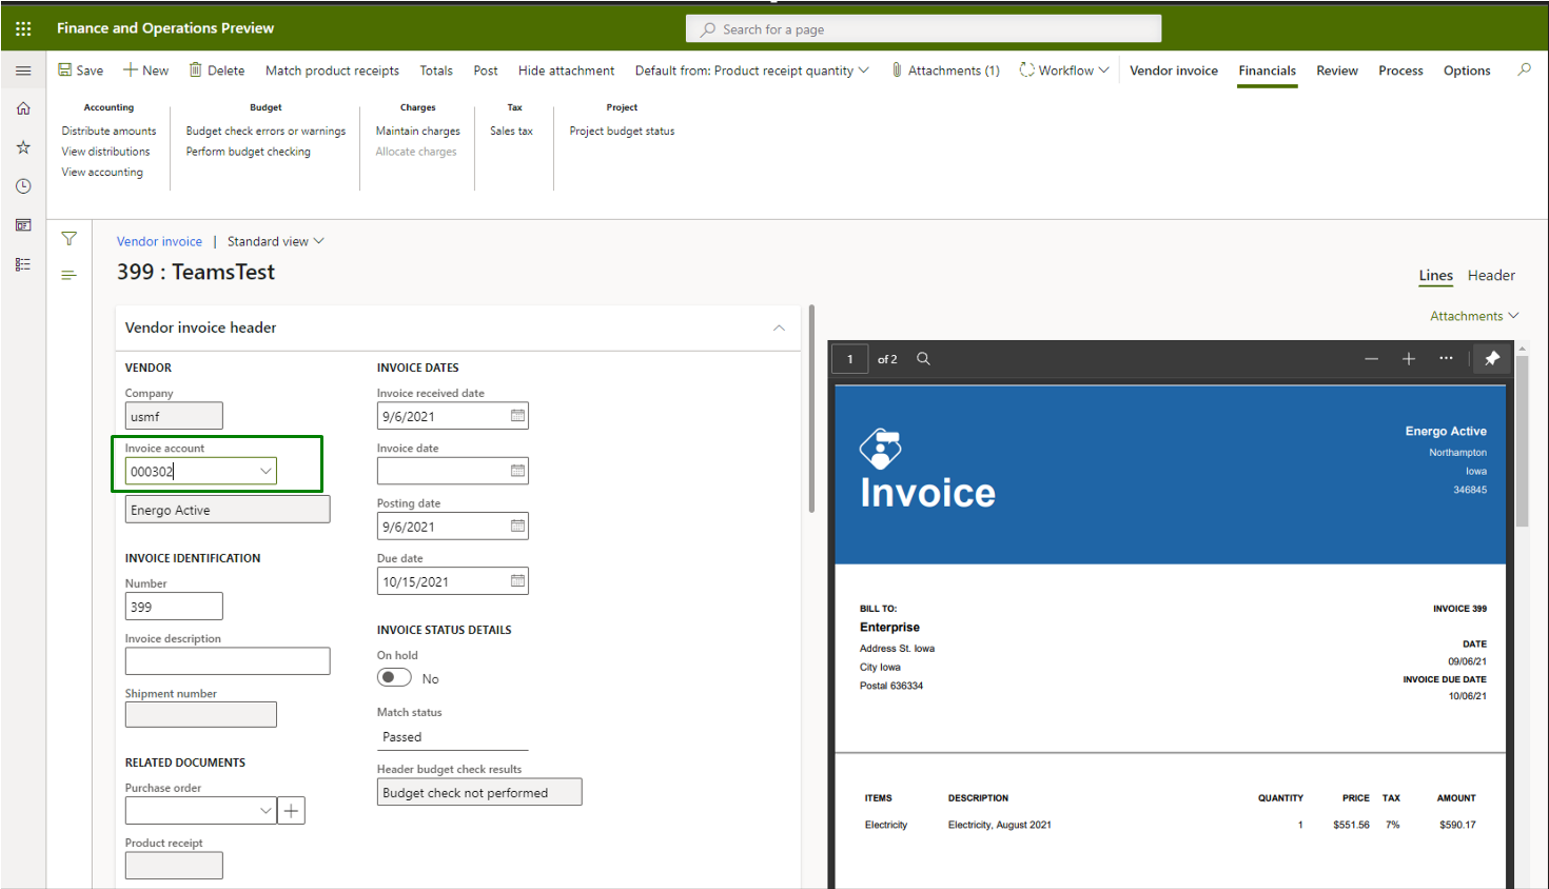 Vendor invoice automation_Pic. 9 – Vendor invoice side by side view (making changes)